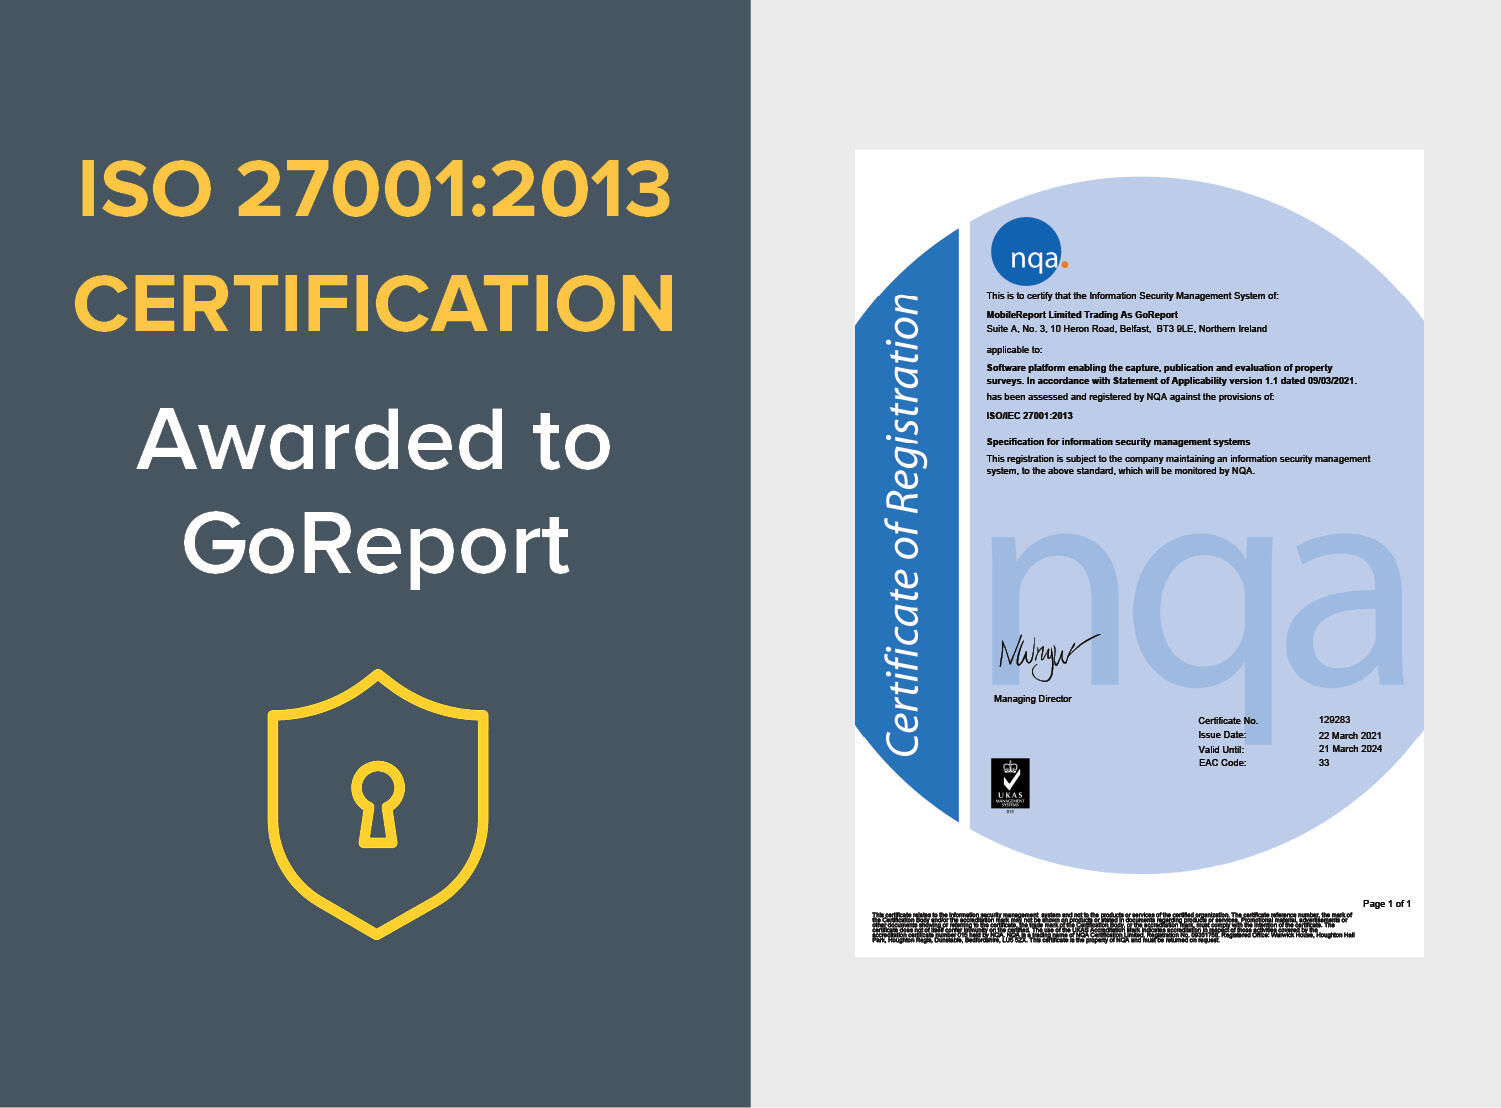 GoReport receives ISO/IEC 27001:2013 Certification for Information Security Management Systems (ISMS)